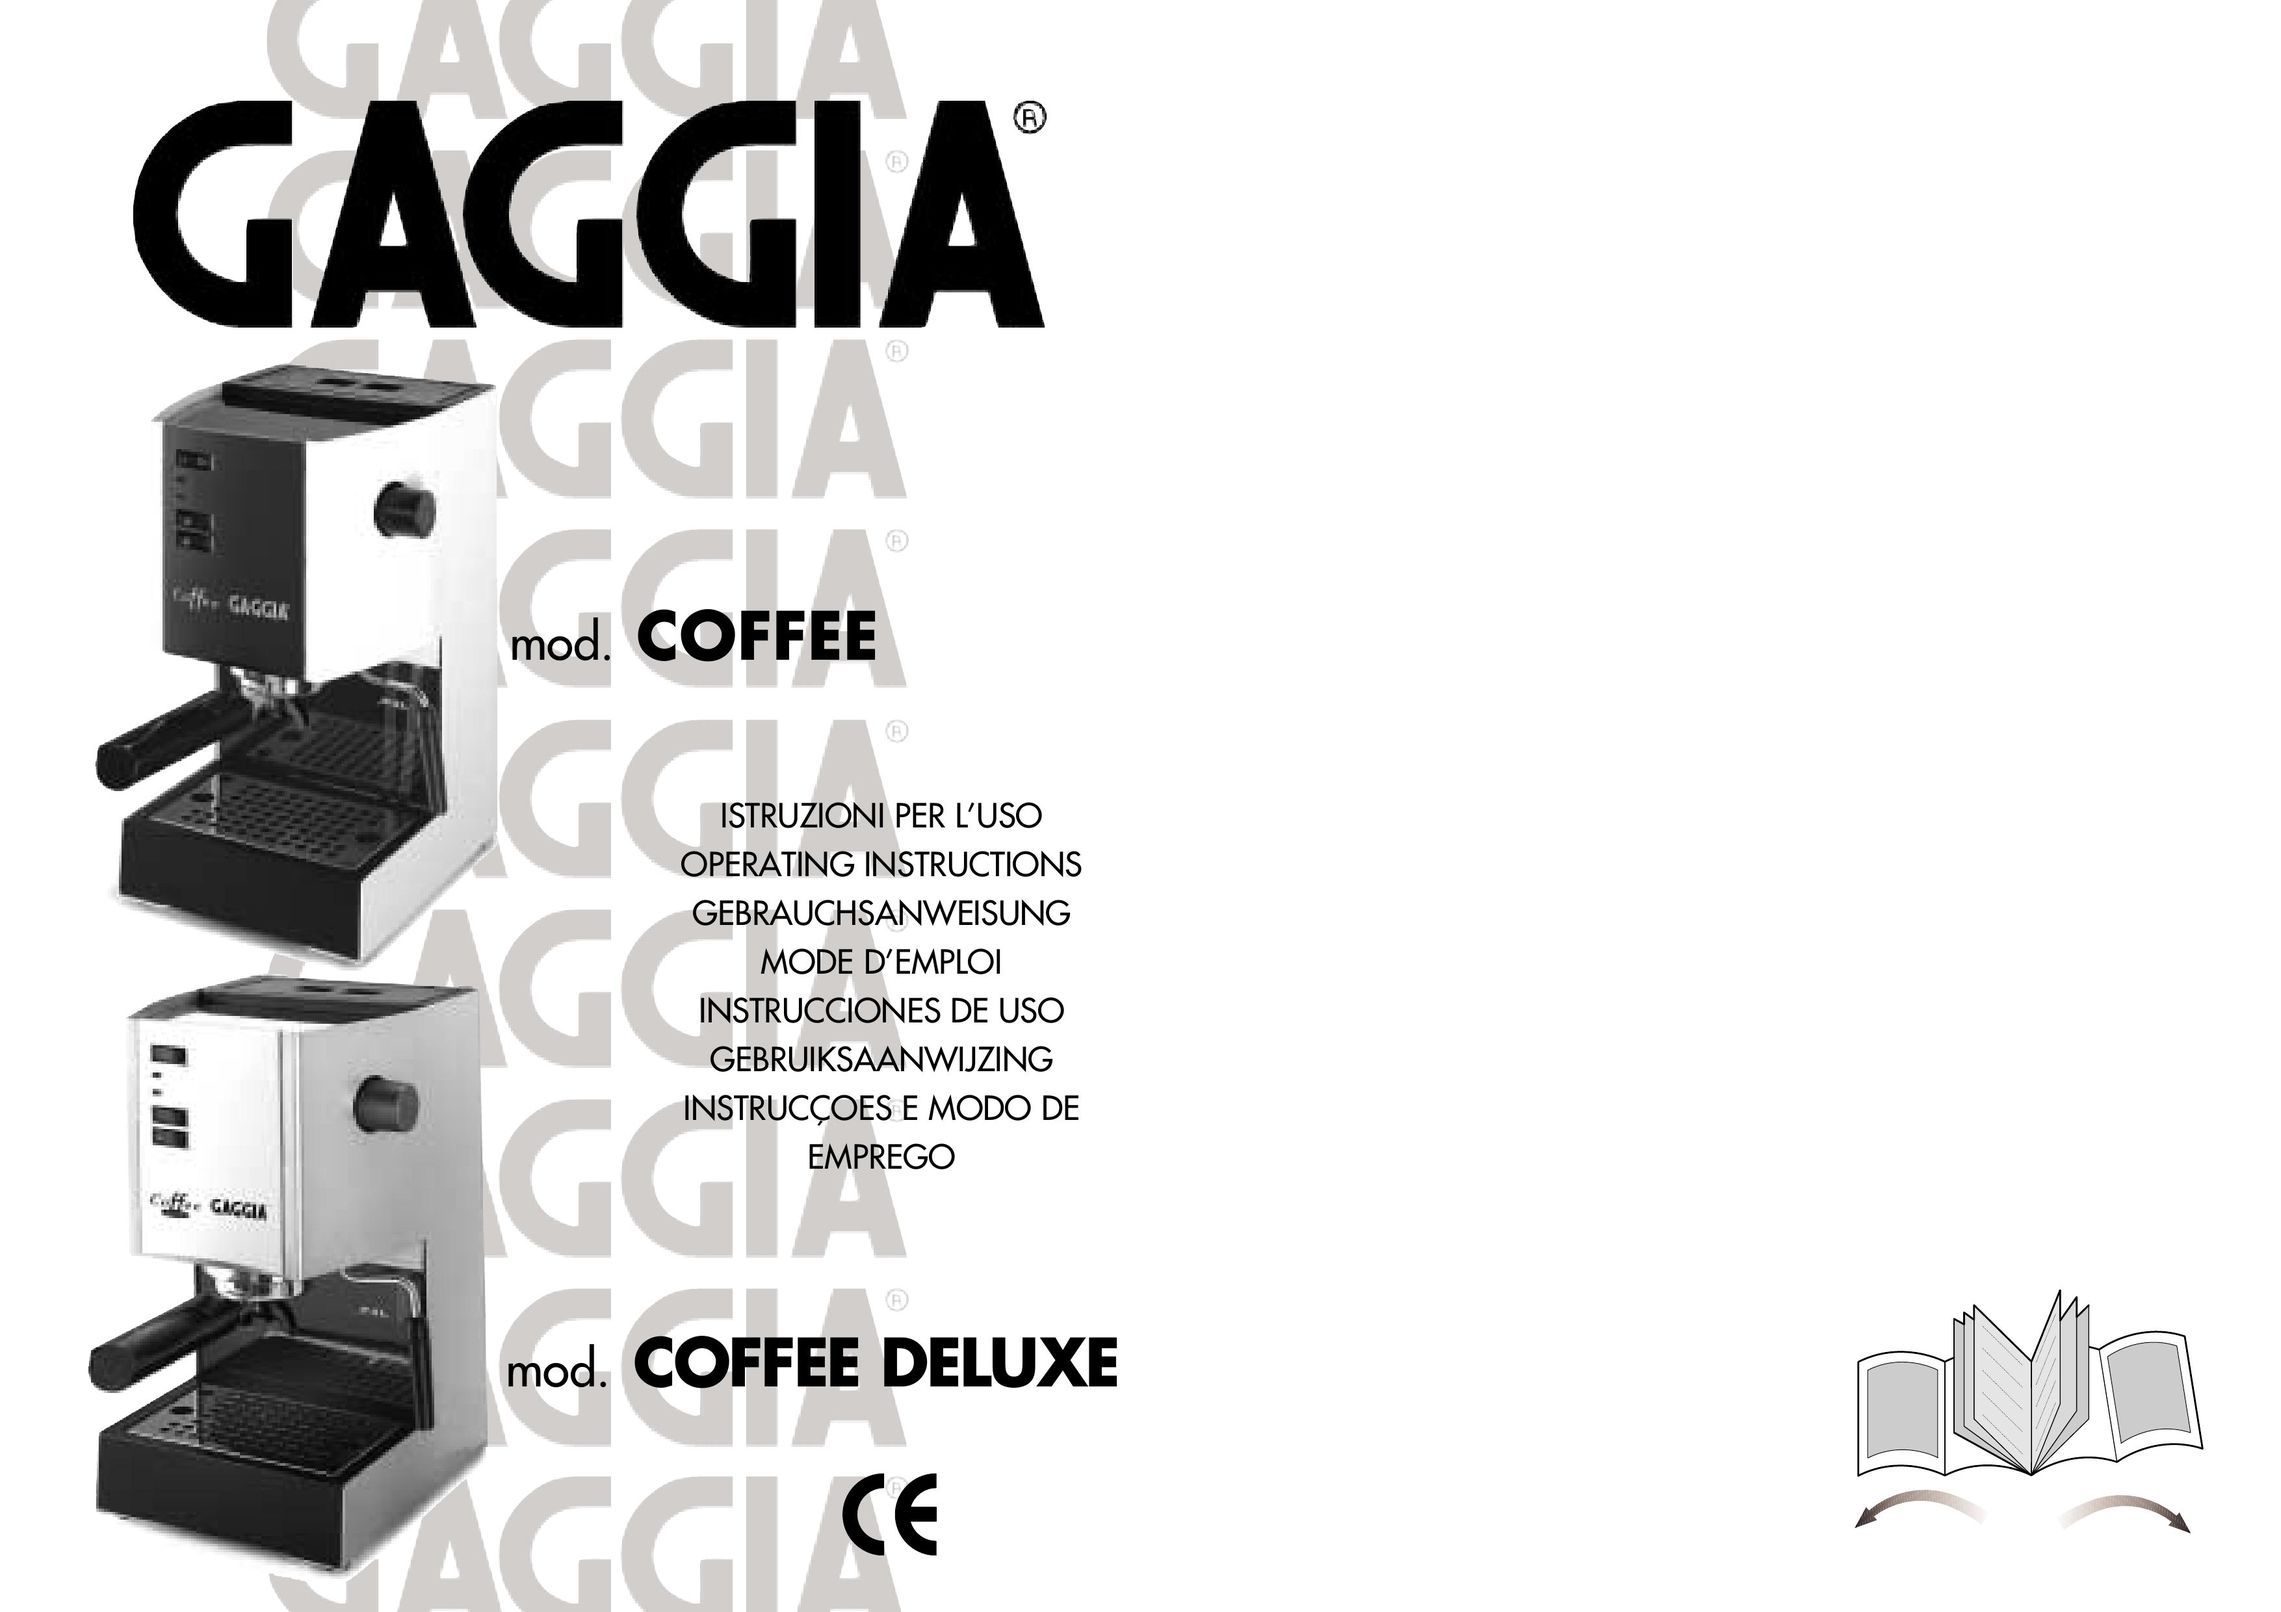 Gaggia COFFEE DELUXE Coffee Grinder User Manual